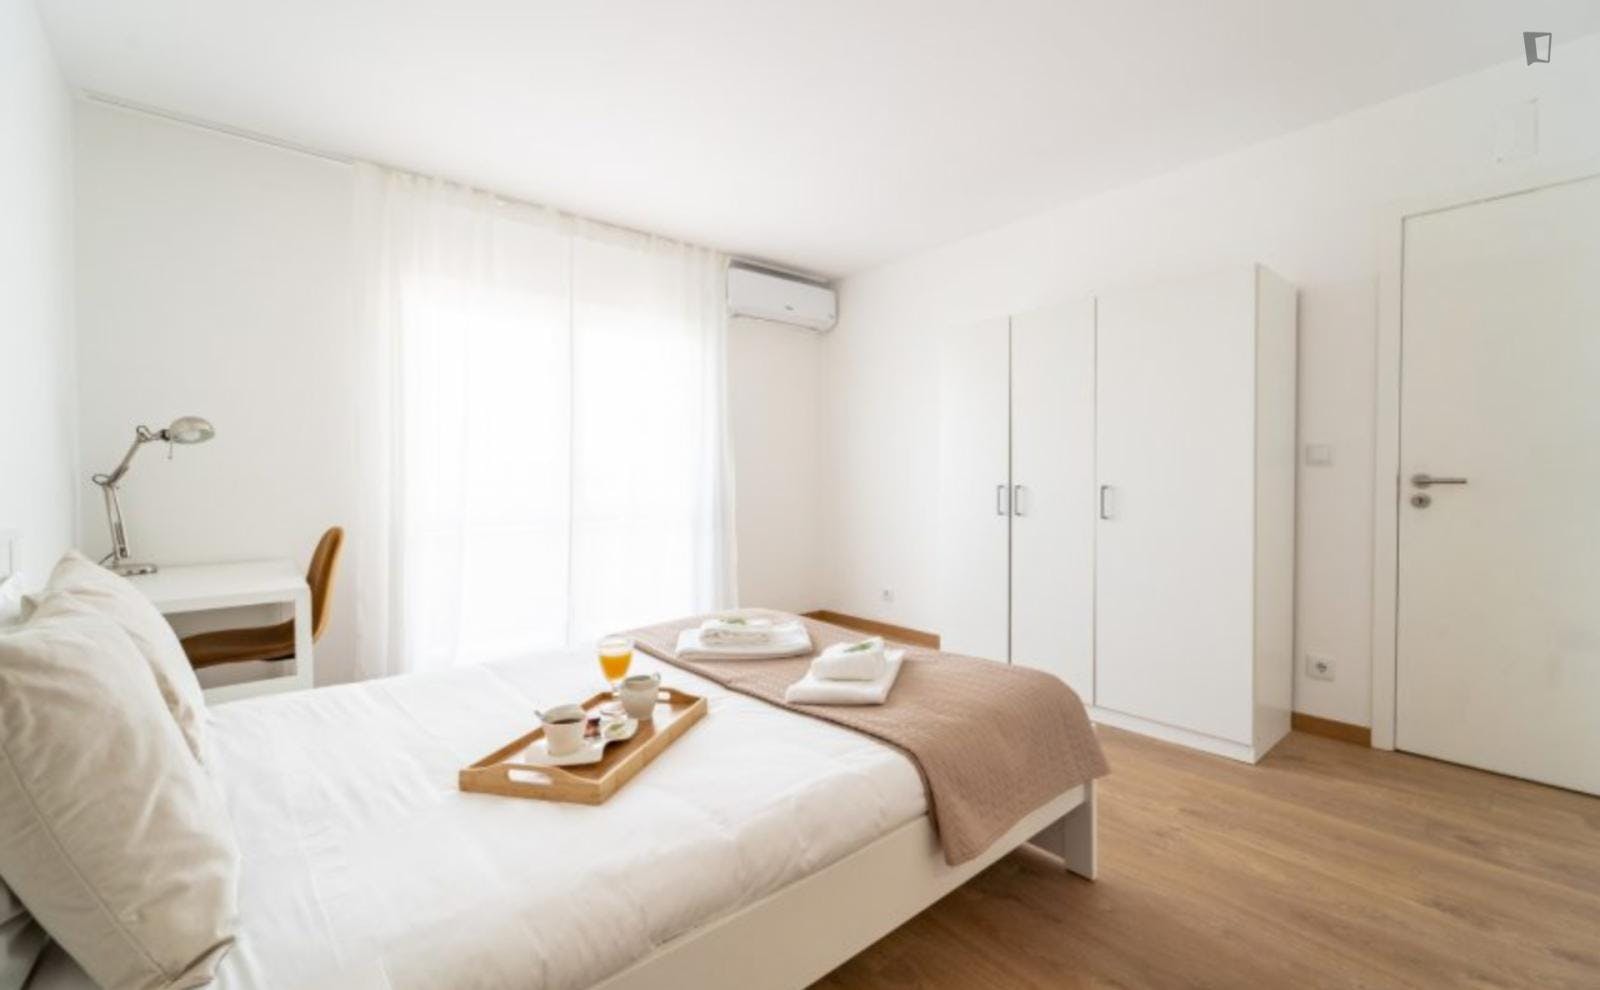 Elegant double bedroom not far from the University of Minho - Campus of Gualtar